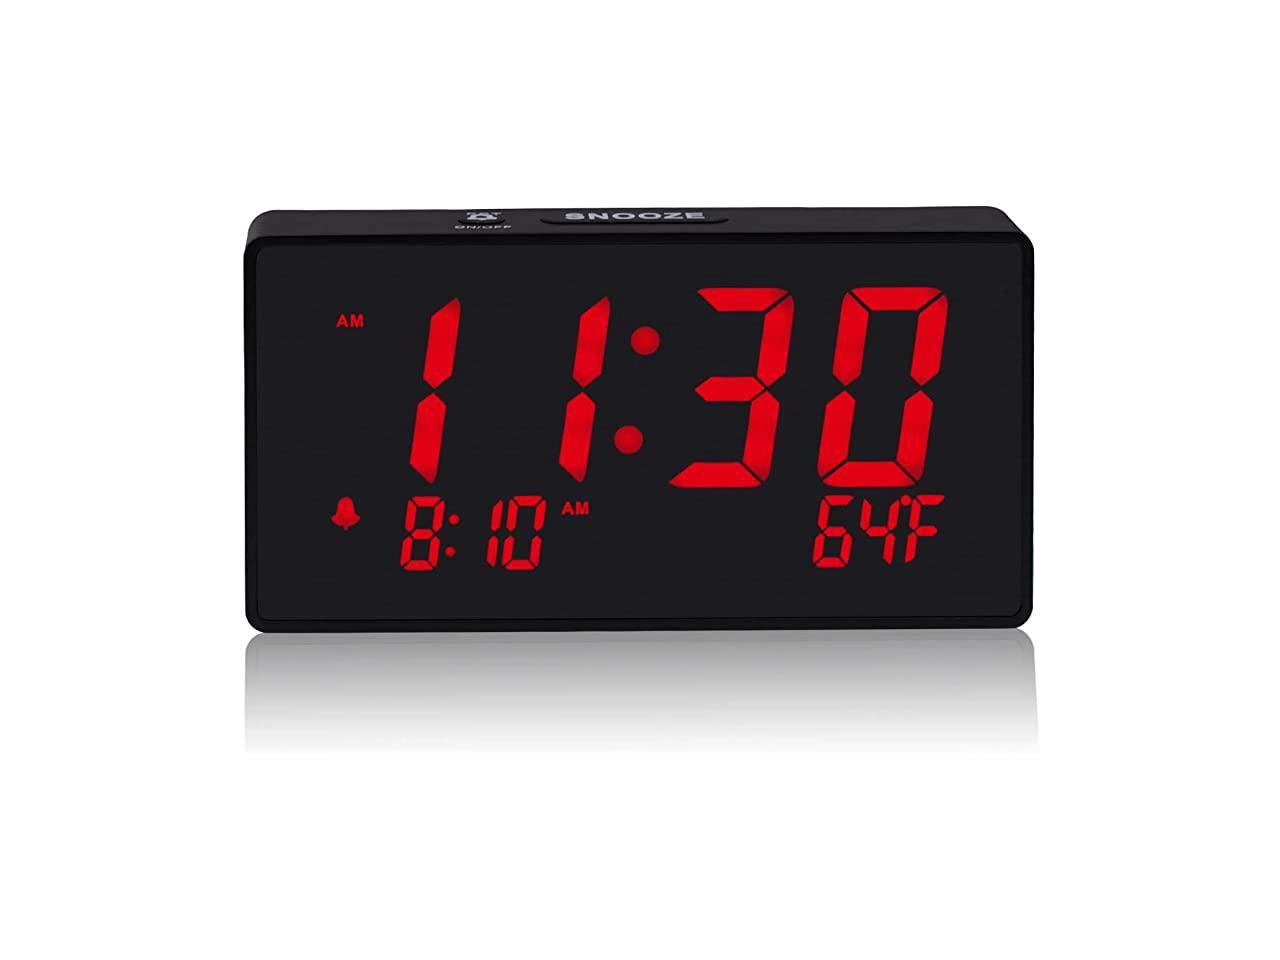 LED Alarm Clock MIRROR Display with Dimmer Temperature with USB Charging Port 